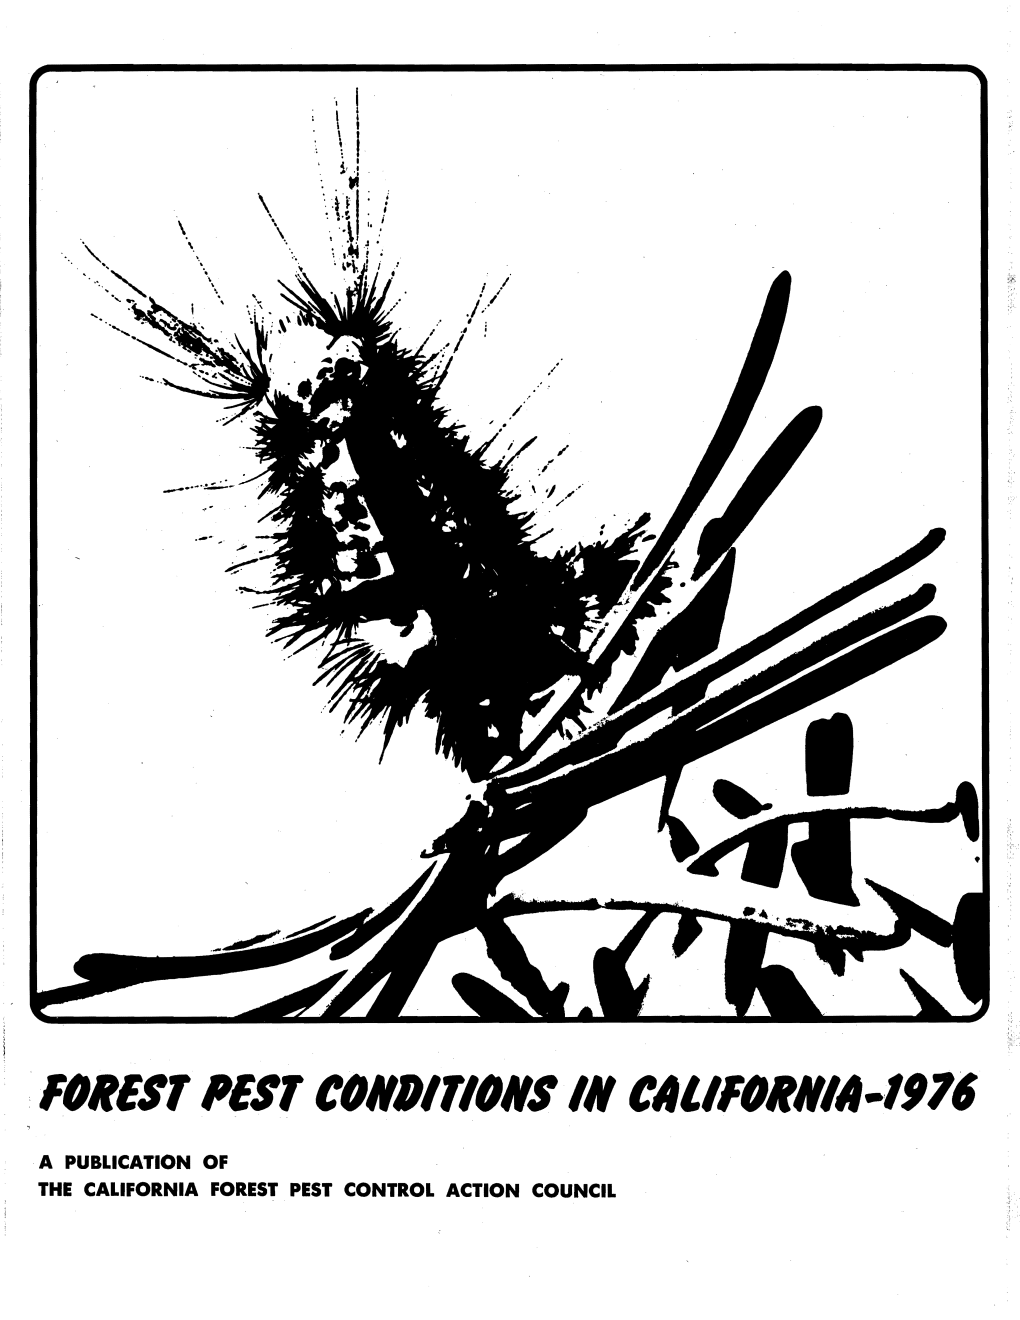 Forest Pest Conditions in California, 1976